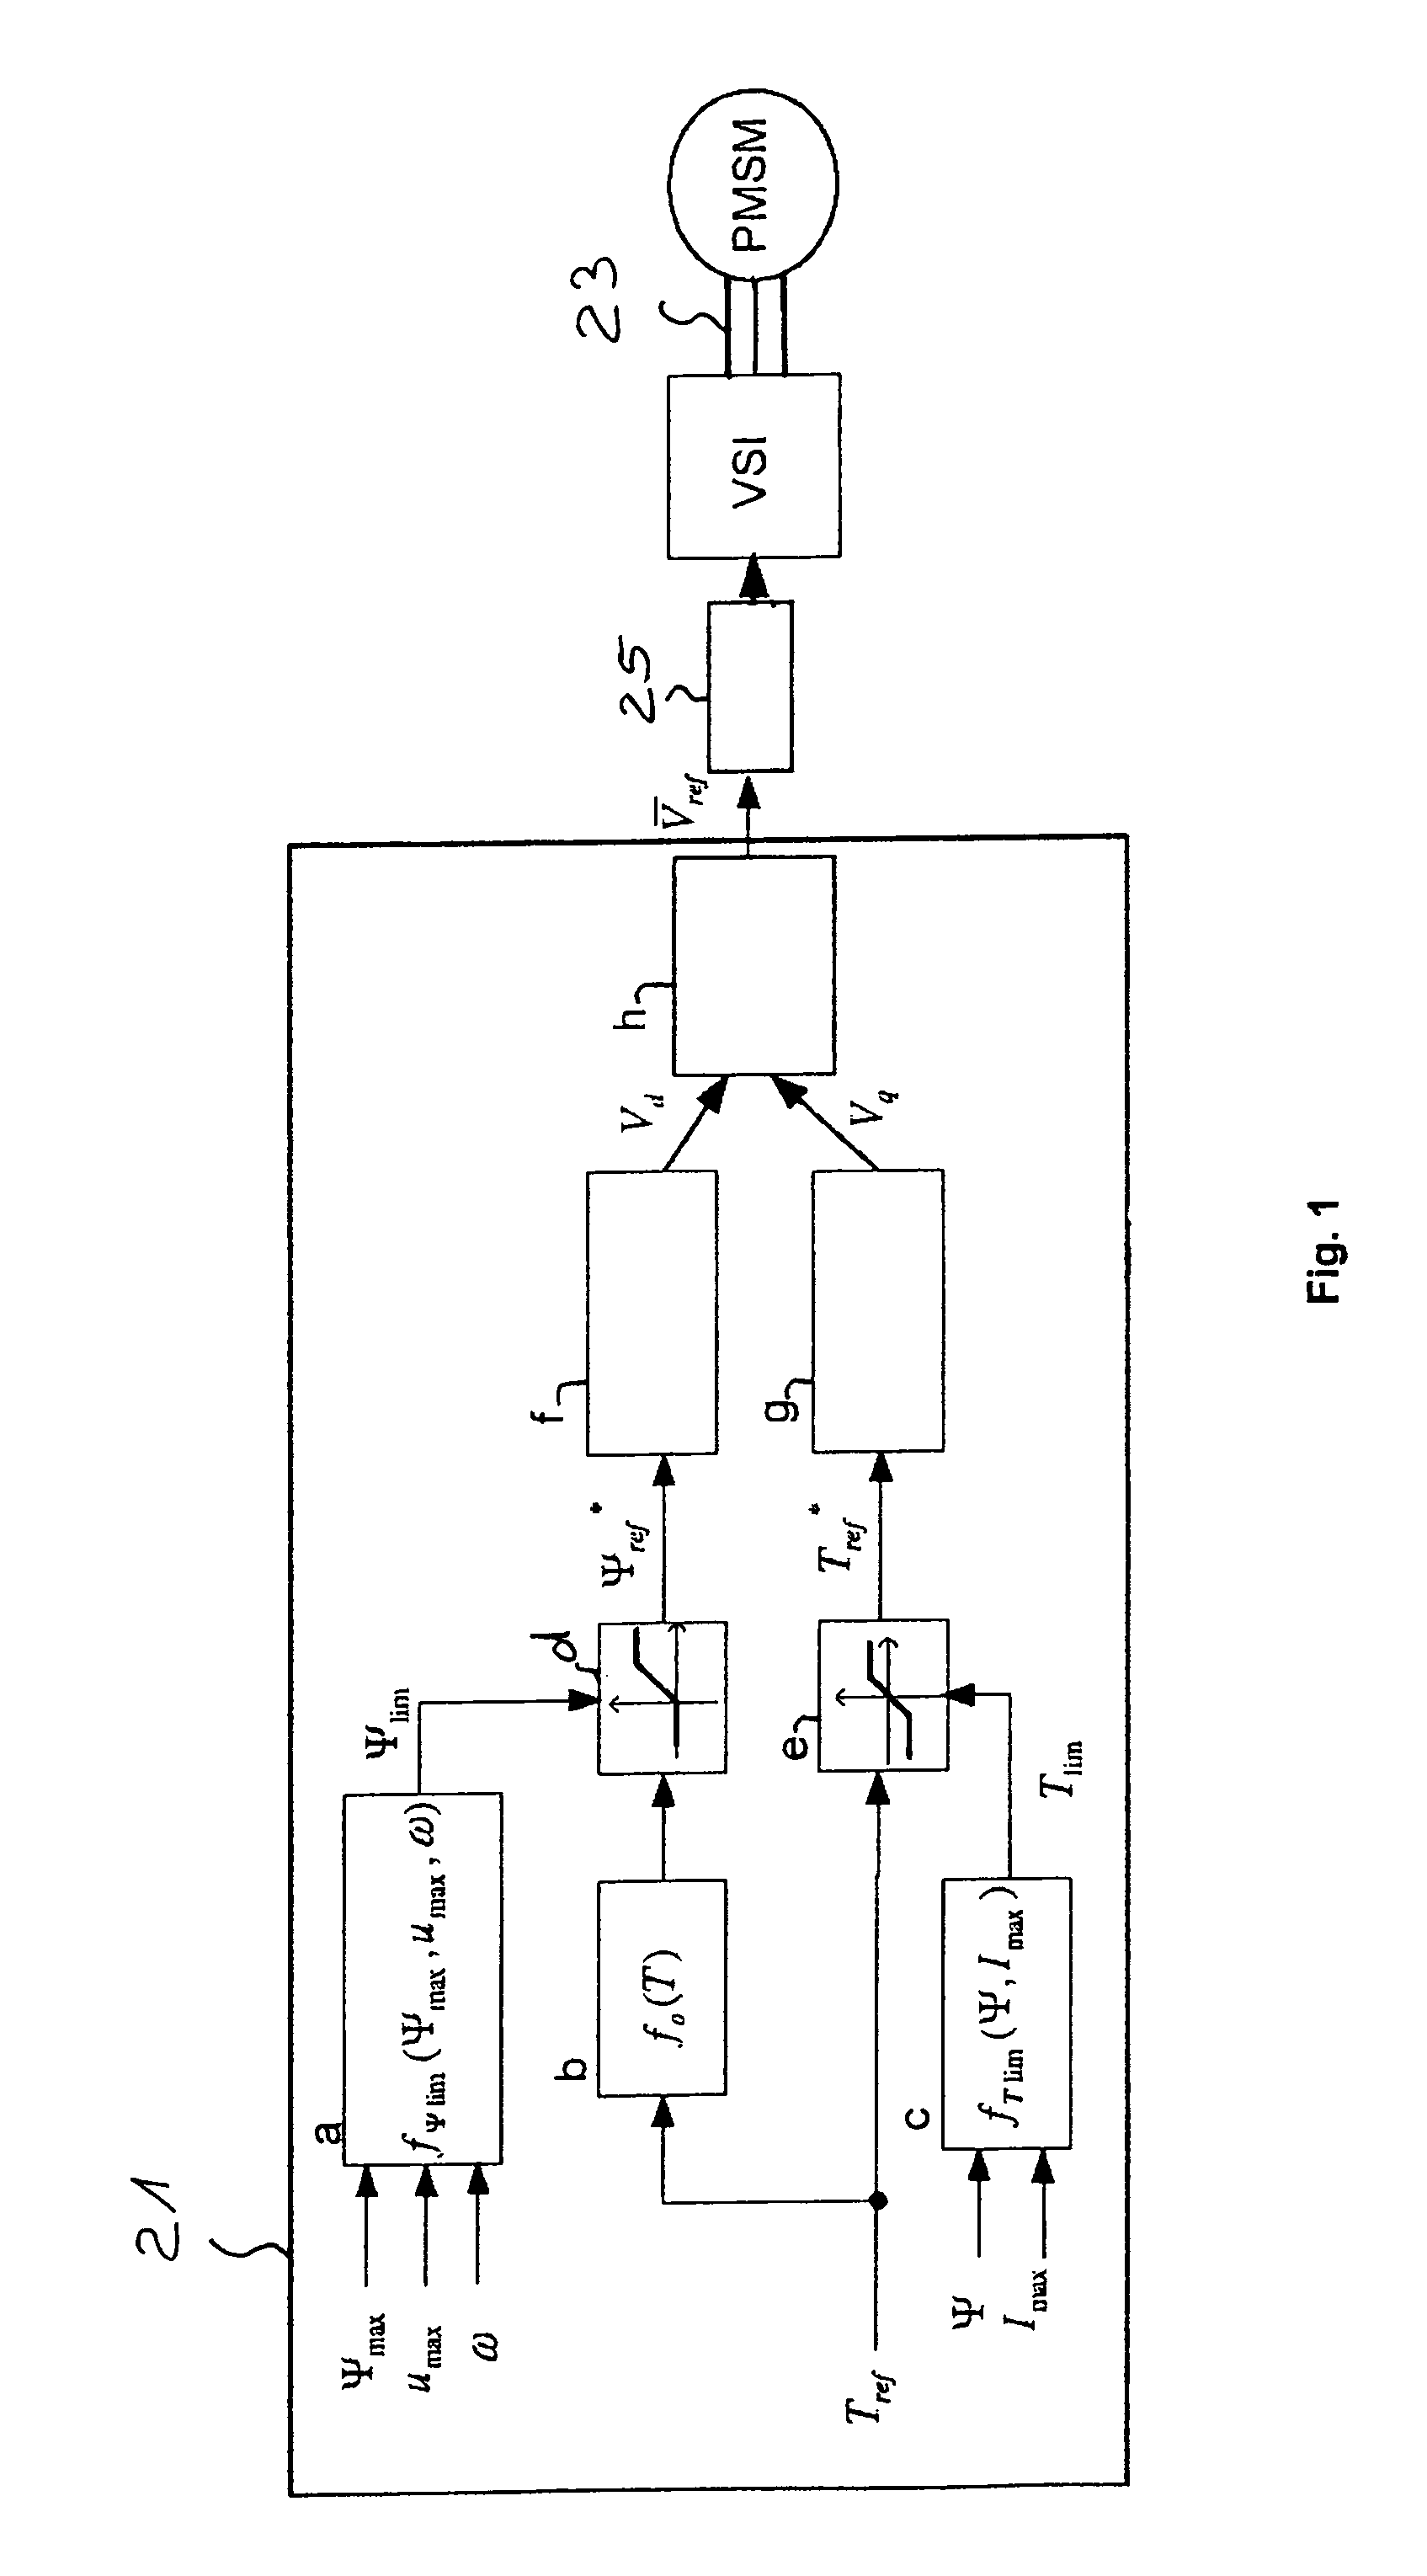 Operating a synchronous motor having a permanent magnet rotor